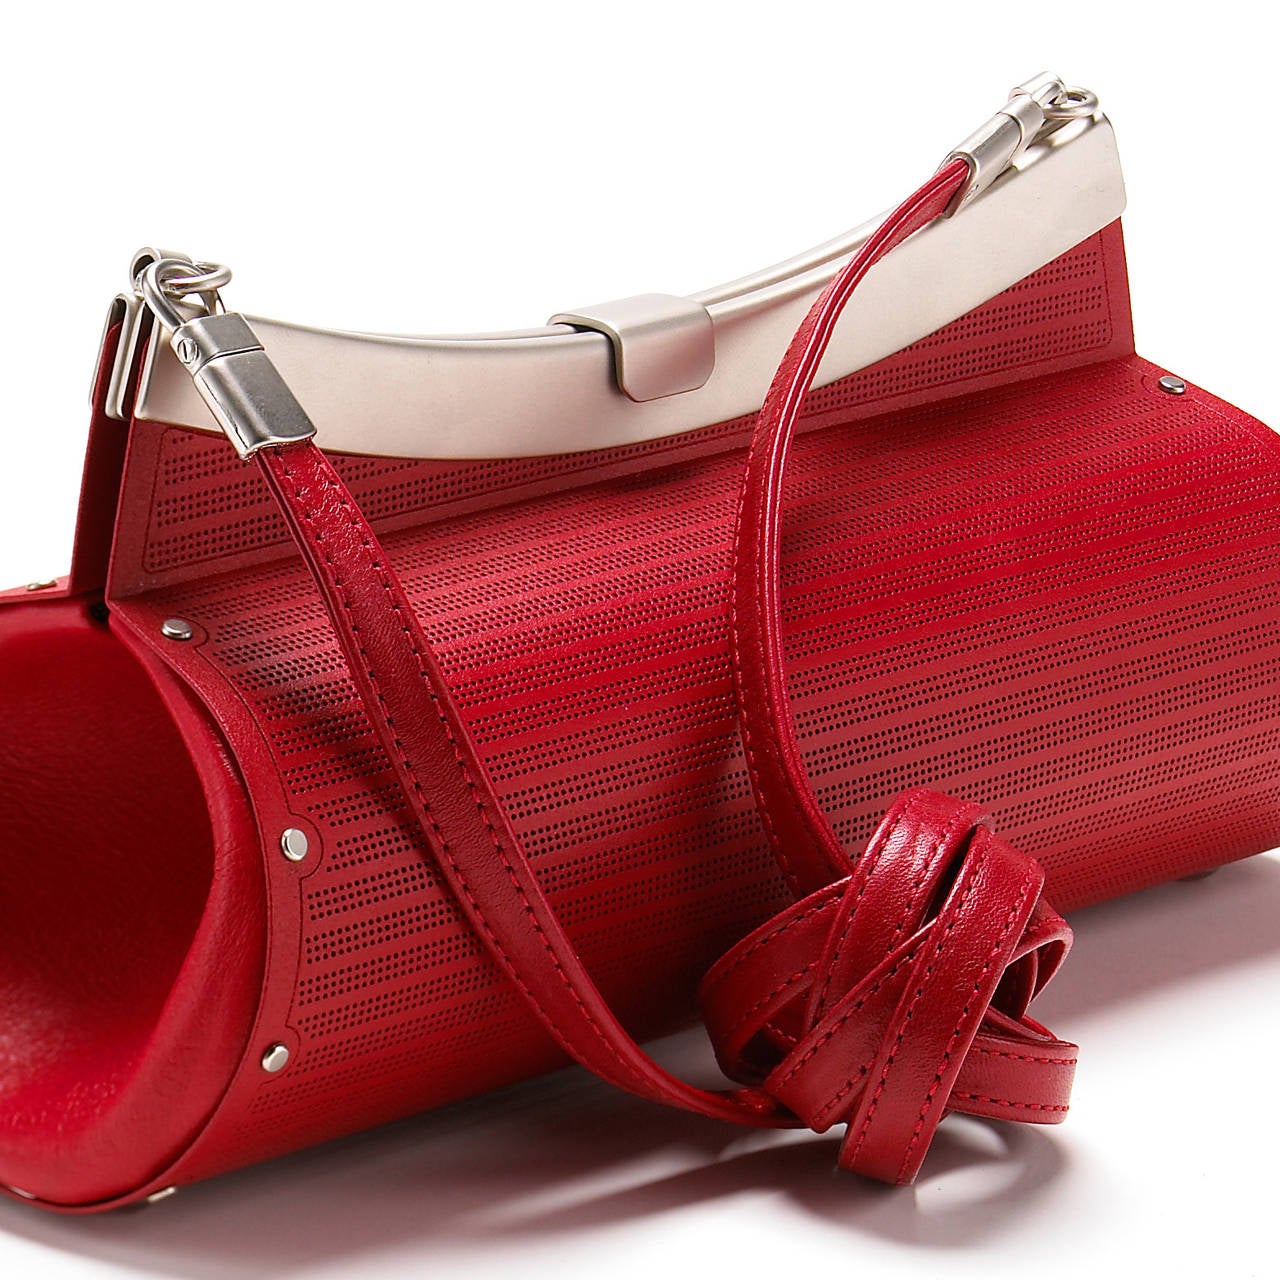 One-of-a-Kind Cylindrical Bag handcrafted in etched and laser-painted red stainless steel with matte satin stainless steel hardware and red leather accents and strap. The purse showcases a detachable leather shoulder strap for versatile wear. Bag